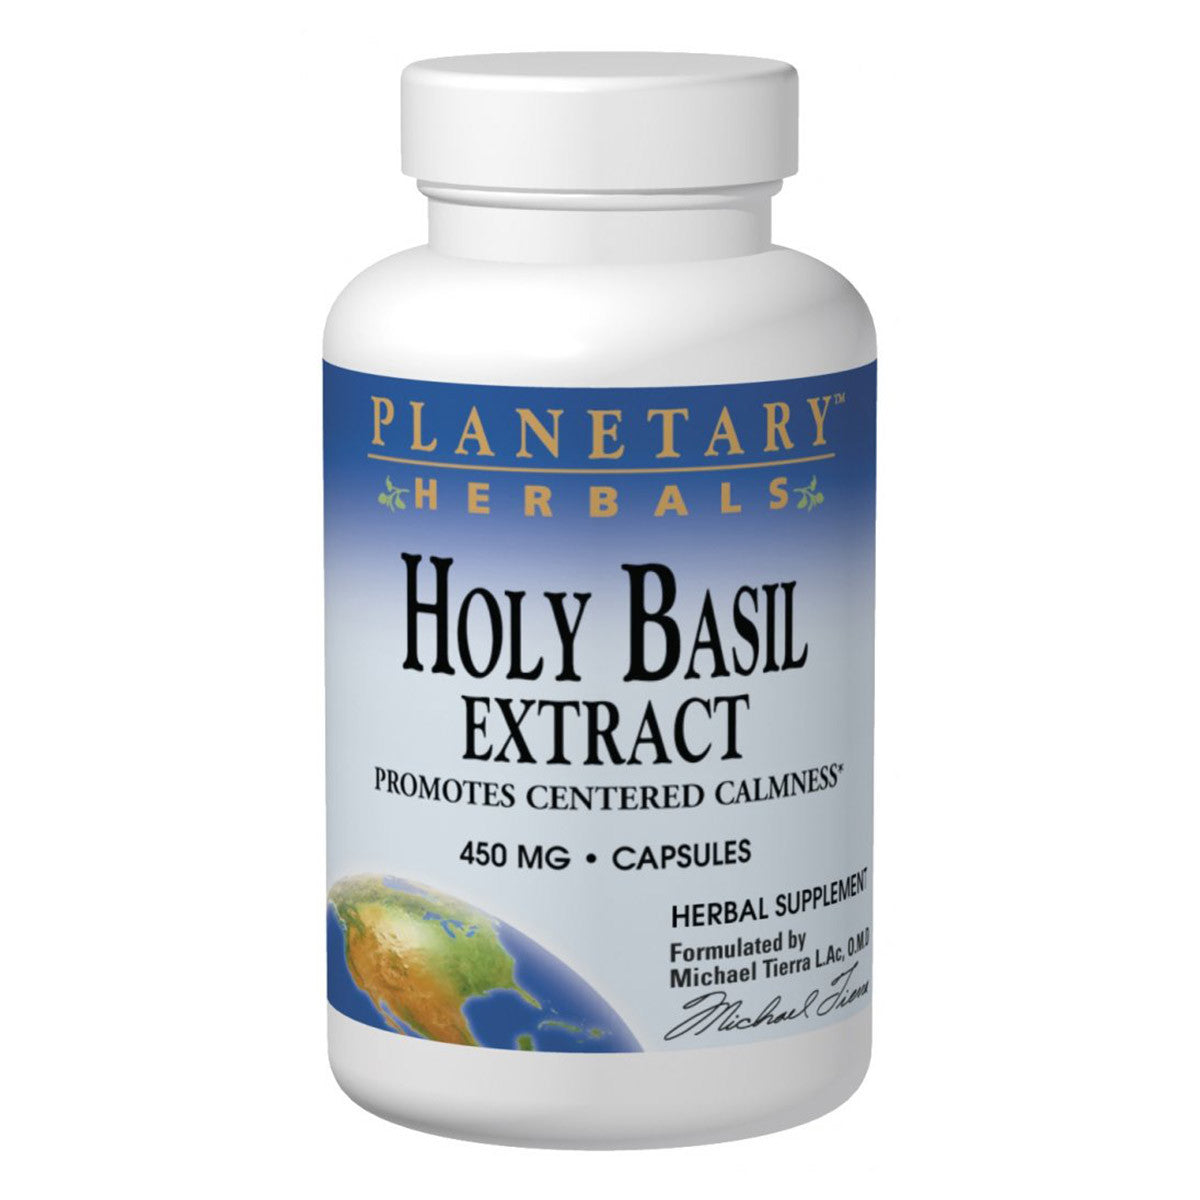 Primary image of Holy Basil Extract 450mg